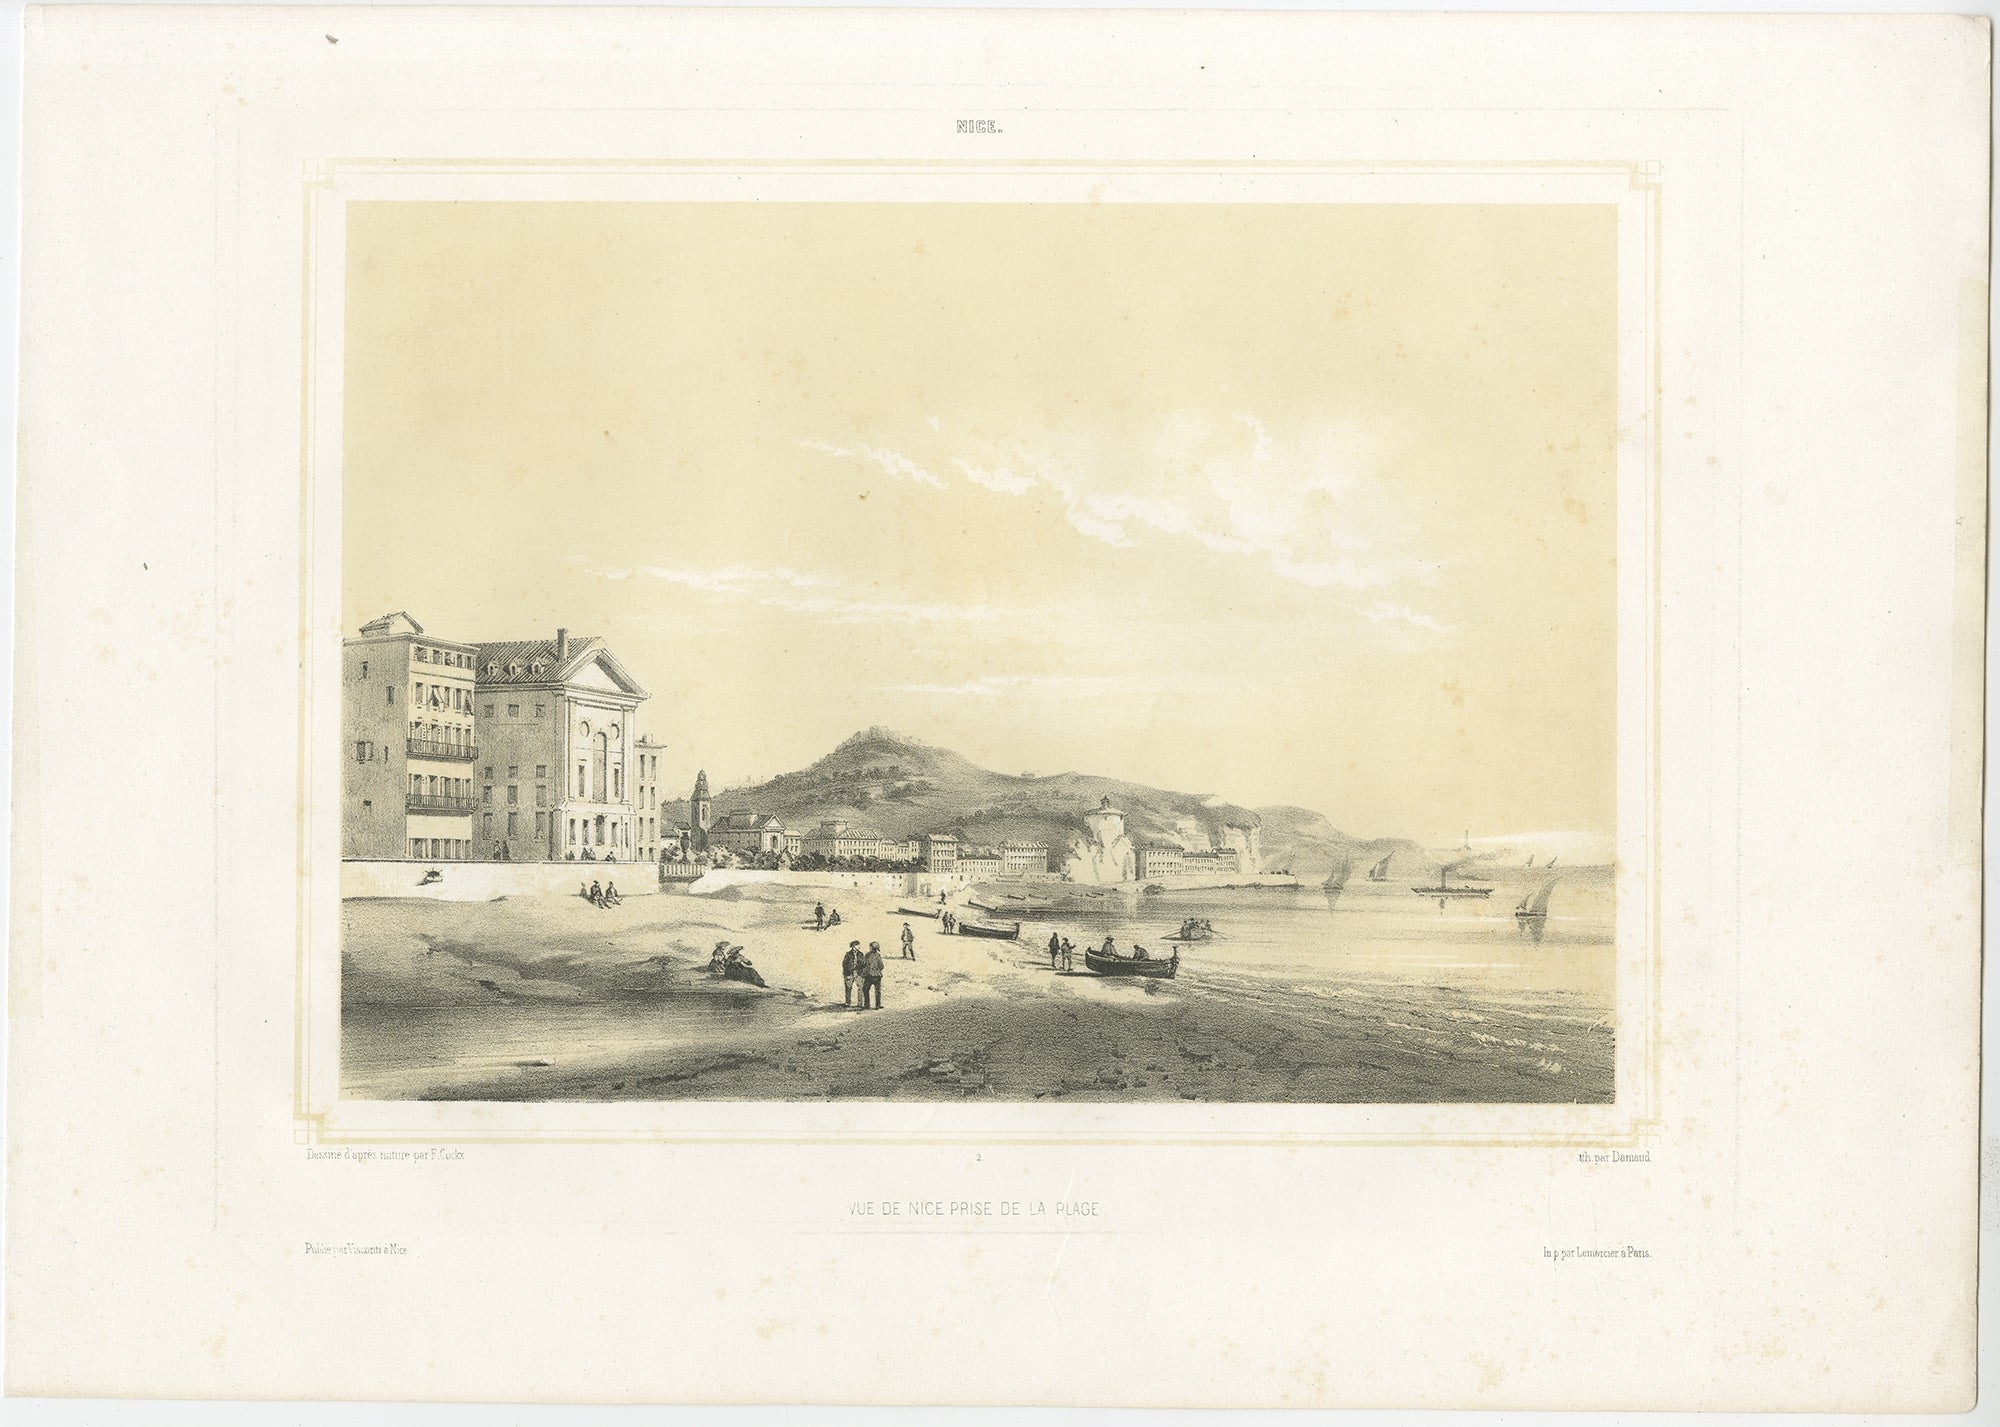 Antique print titled 'Vue de Nice prise de la Plage'. Original antique print of the city of Nice seen from the beach, France. This print originates from the series 'Nice et ses environs', published 1855.

Artists and Engravers: Published by